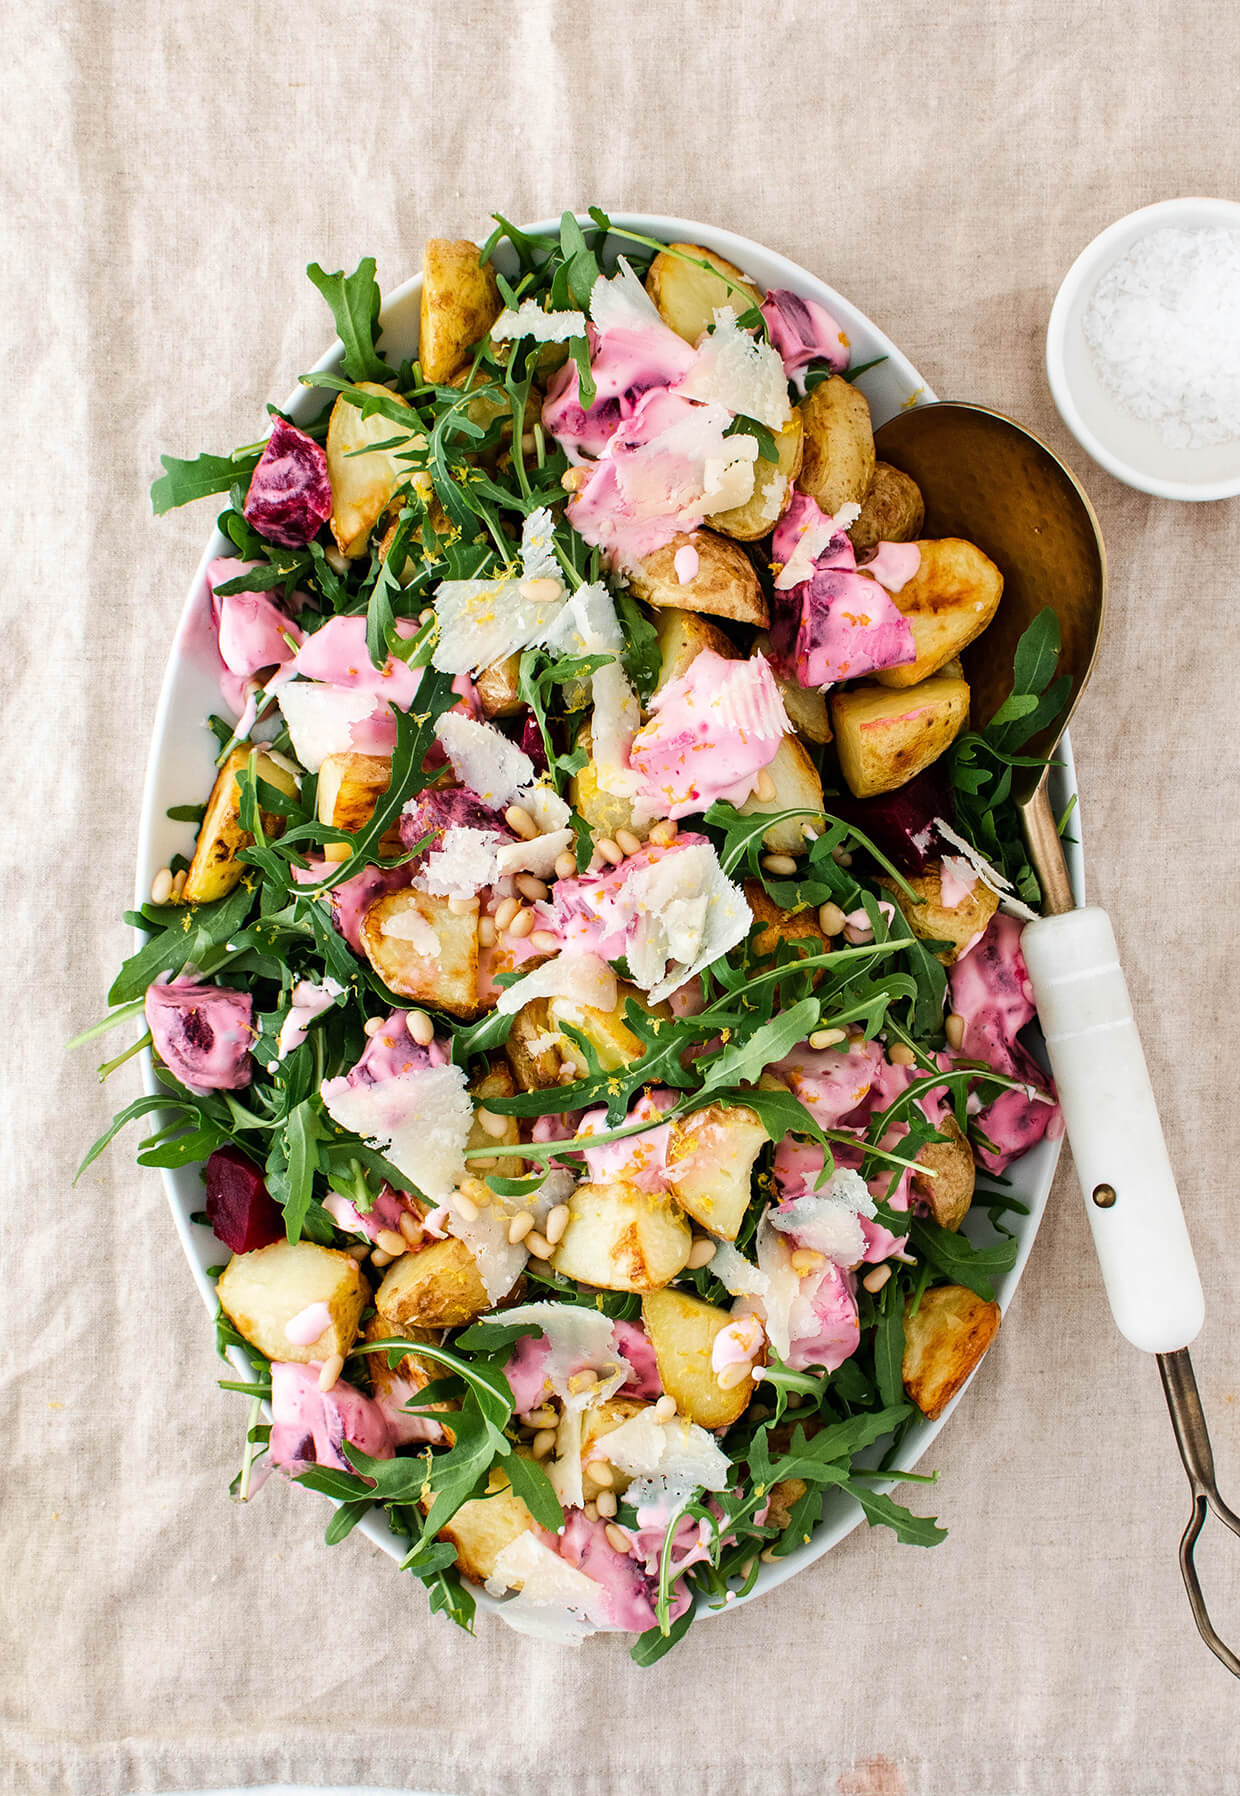 Roasted potatoes with arugula and creamy beets that will satisfy a crowd! A wholesome and simple vegetarian meal that comes together in 40 minutes!